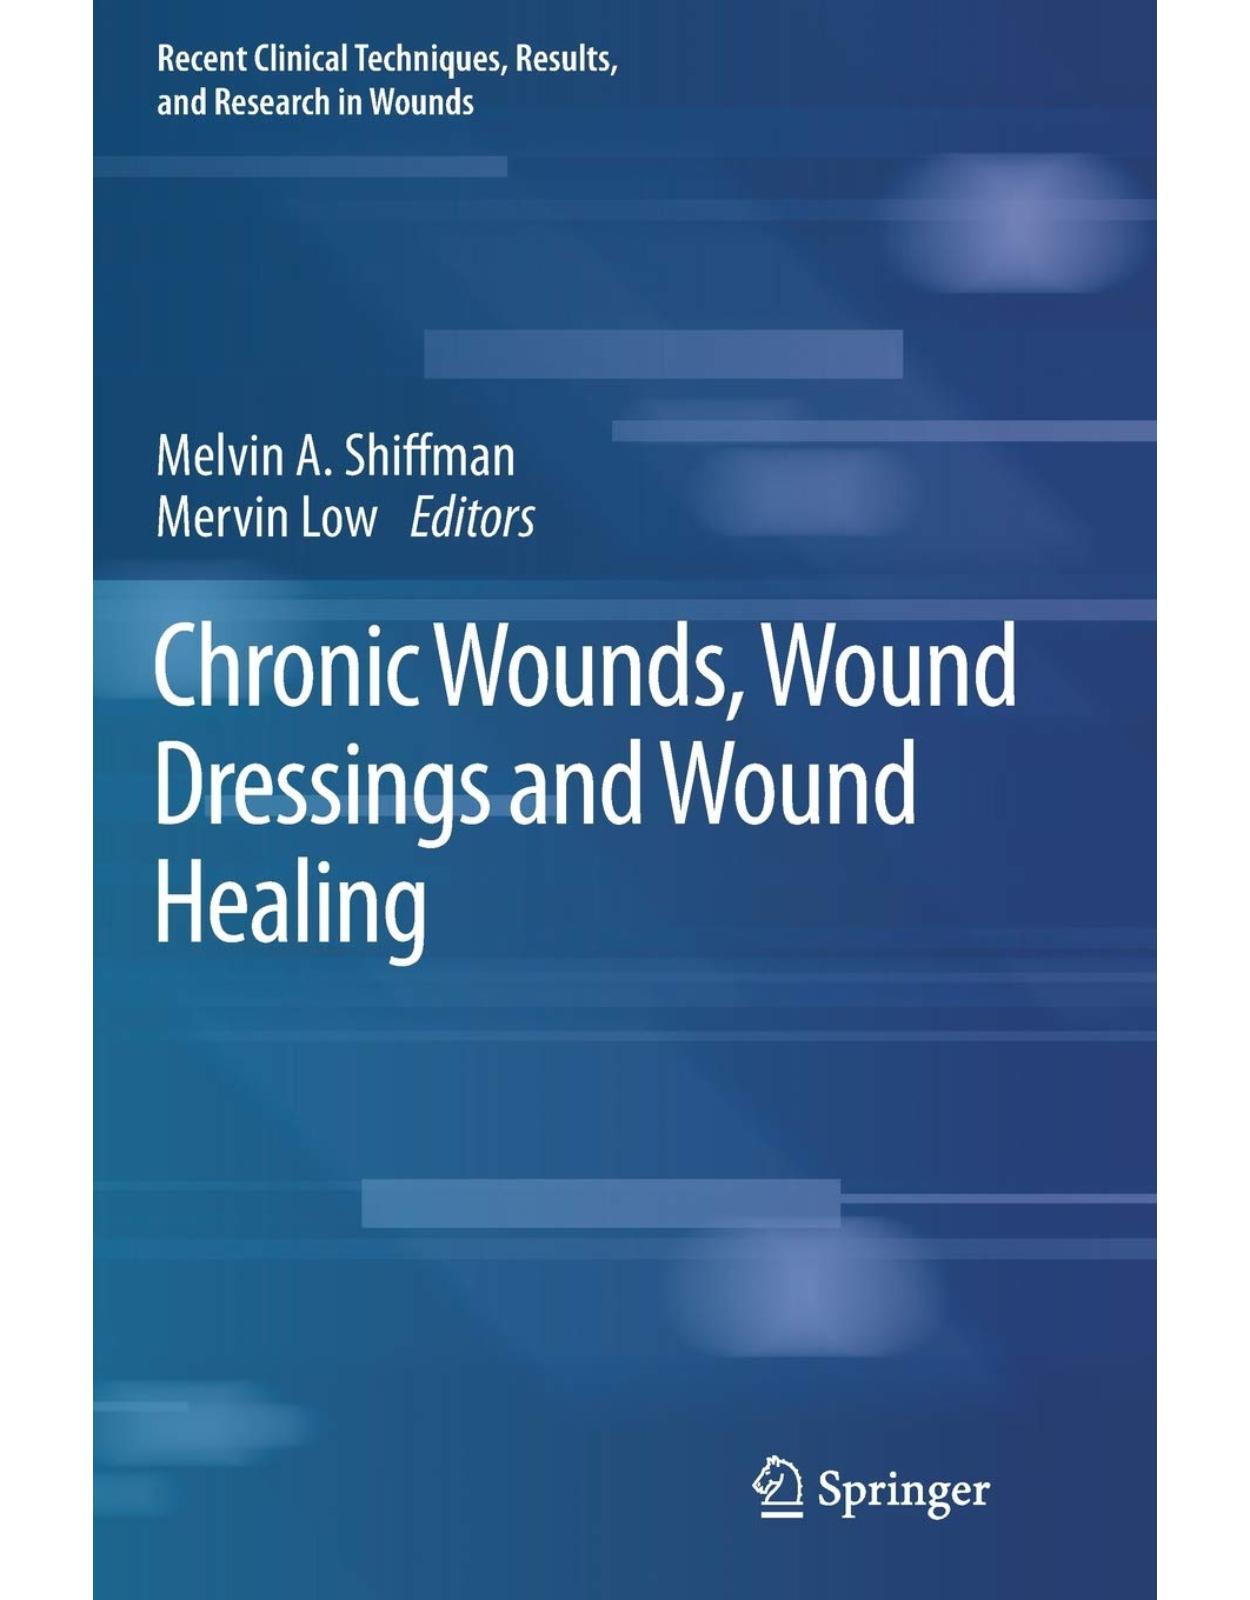 Chronic Wounds, Wound Dressings and Wound Healing: 6 (Recent Clinical Techniques, Results, and Research in Wounds) 